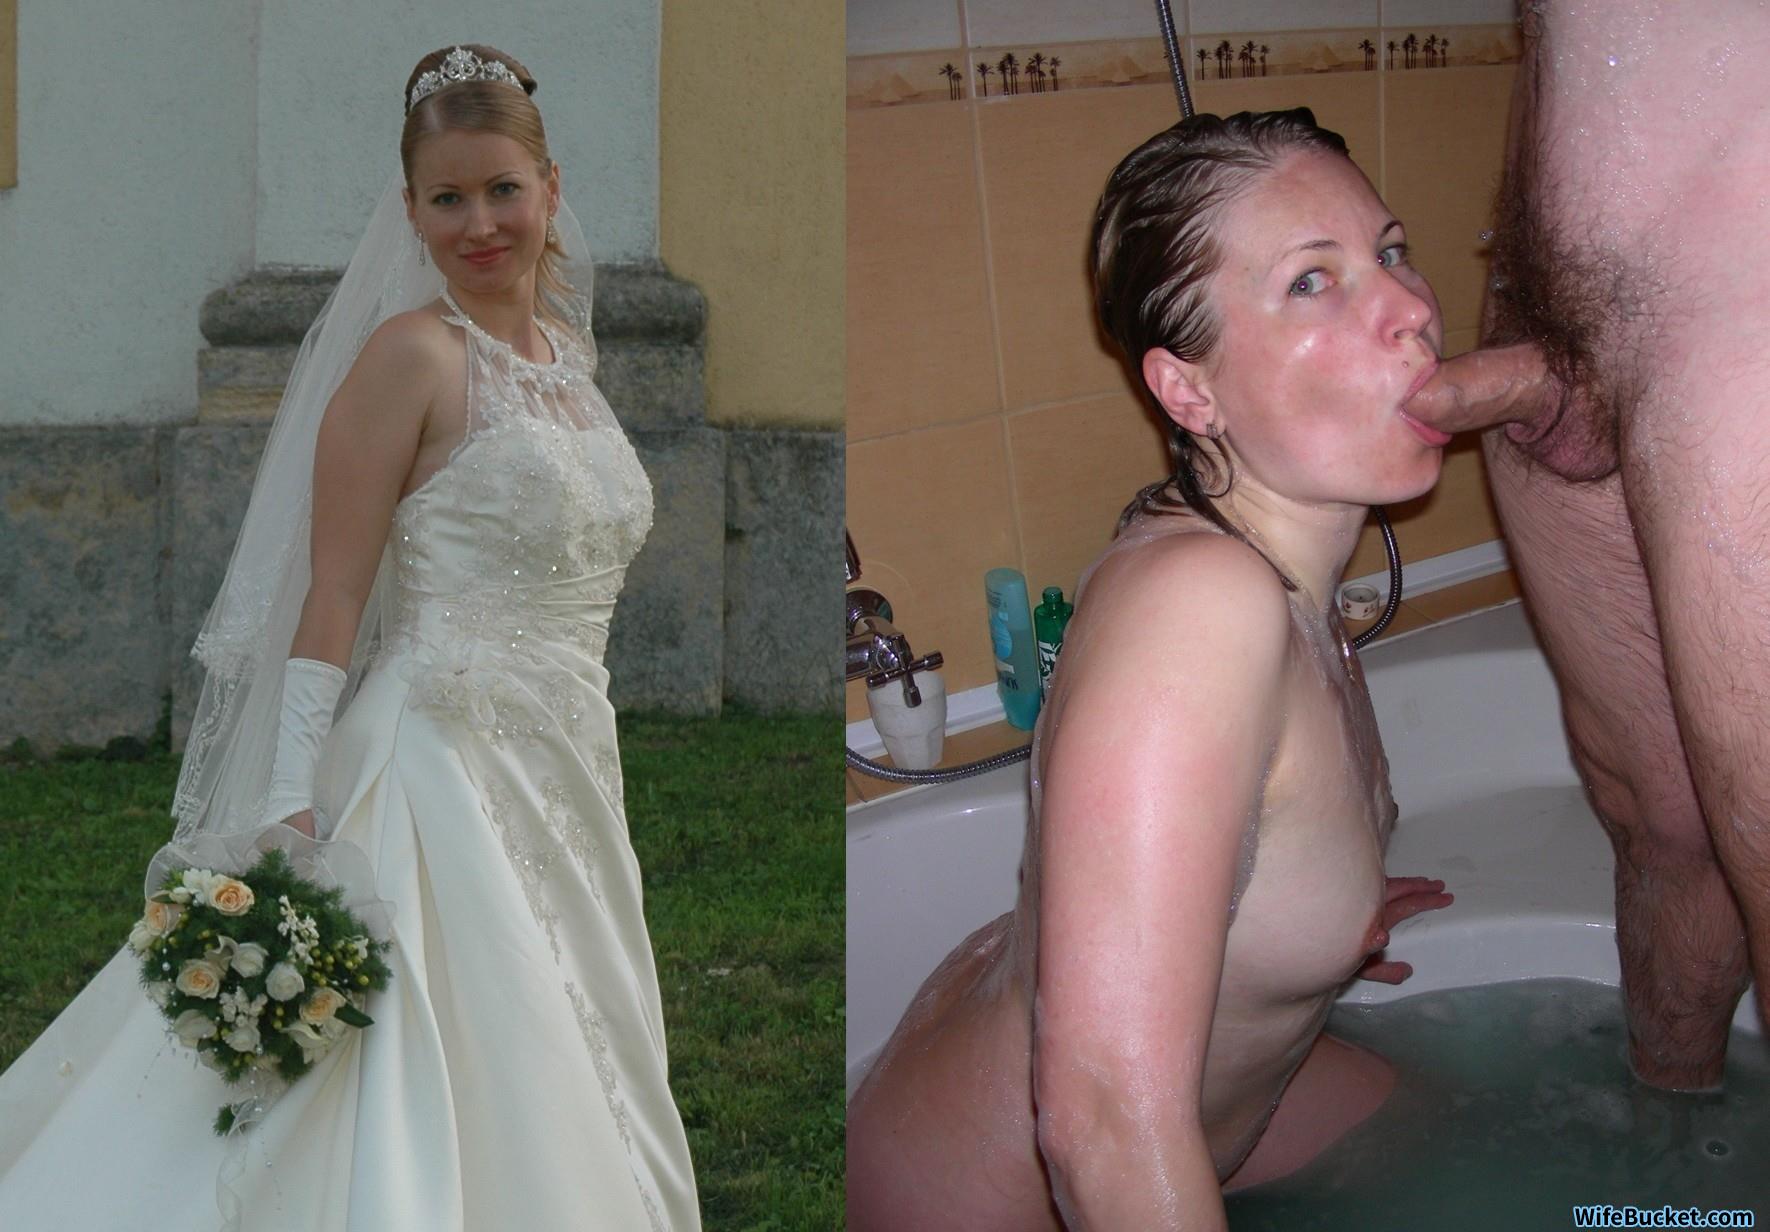 Nude Swinger Wedding - Before-after nudes of sexy amateur brides! Some home porn, too :-) â€“  WifeBucket | Offical MILF Blog